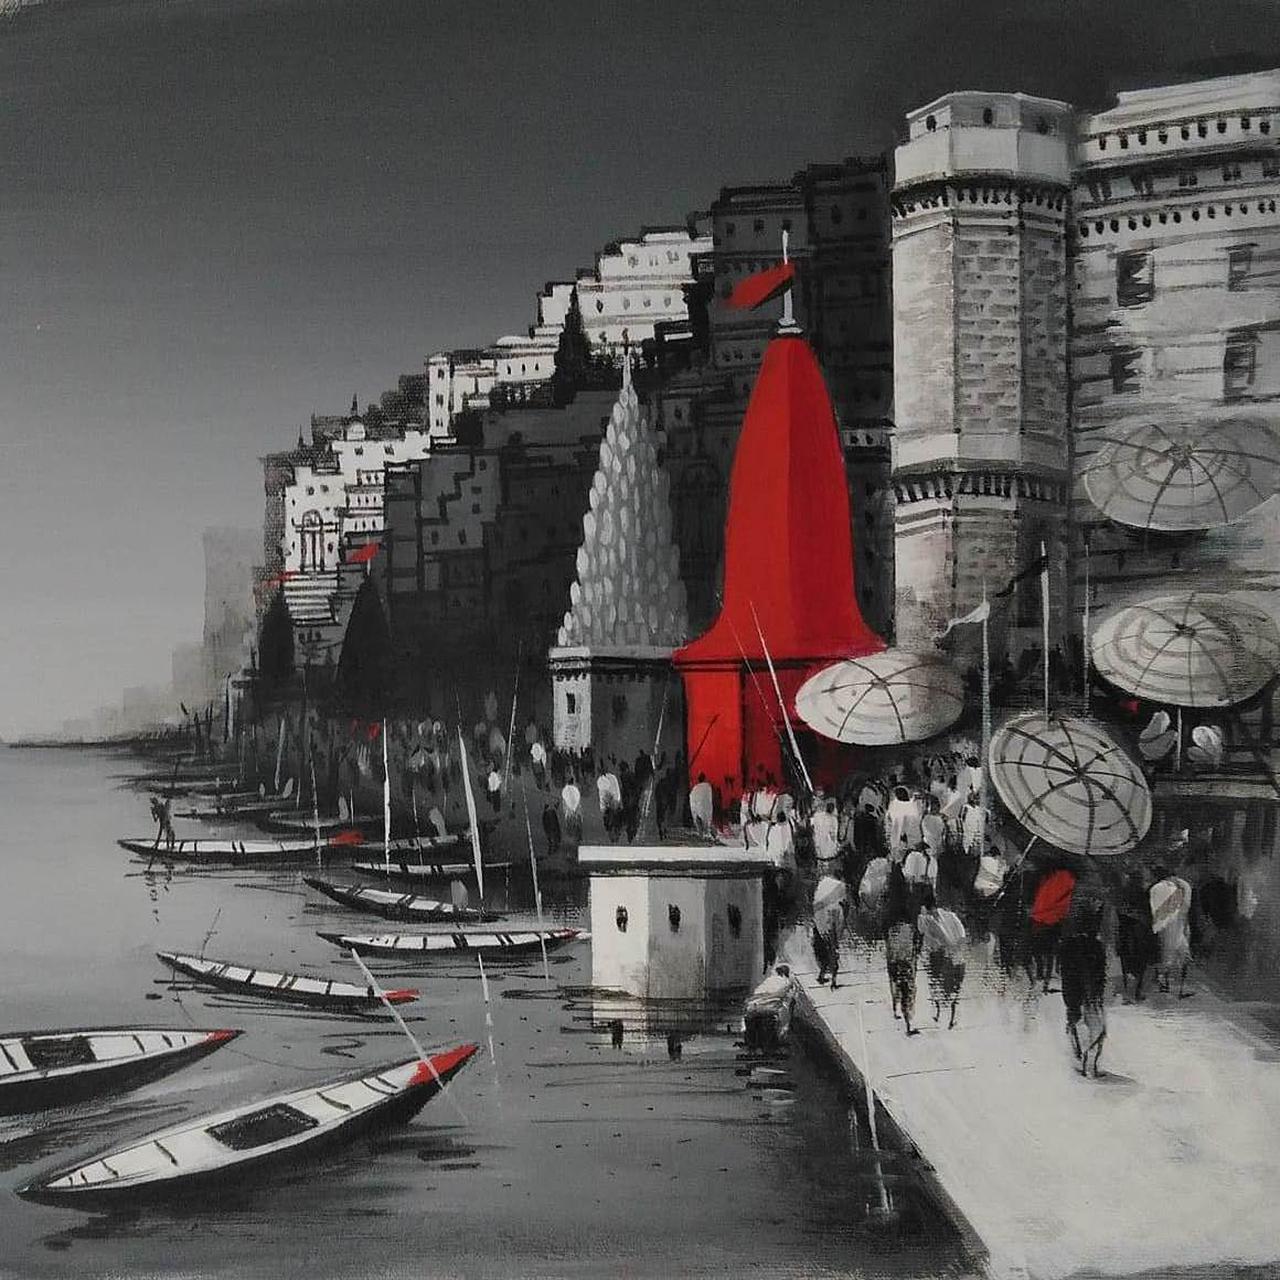 Dilip Chaudhury Figurative Painting - Benaras, Acrylic on Canvas by Contemporary Indian Artist "In Stock"